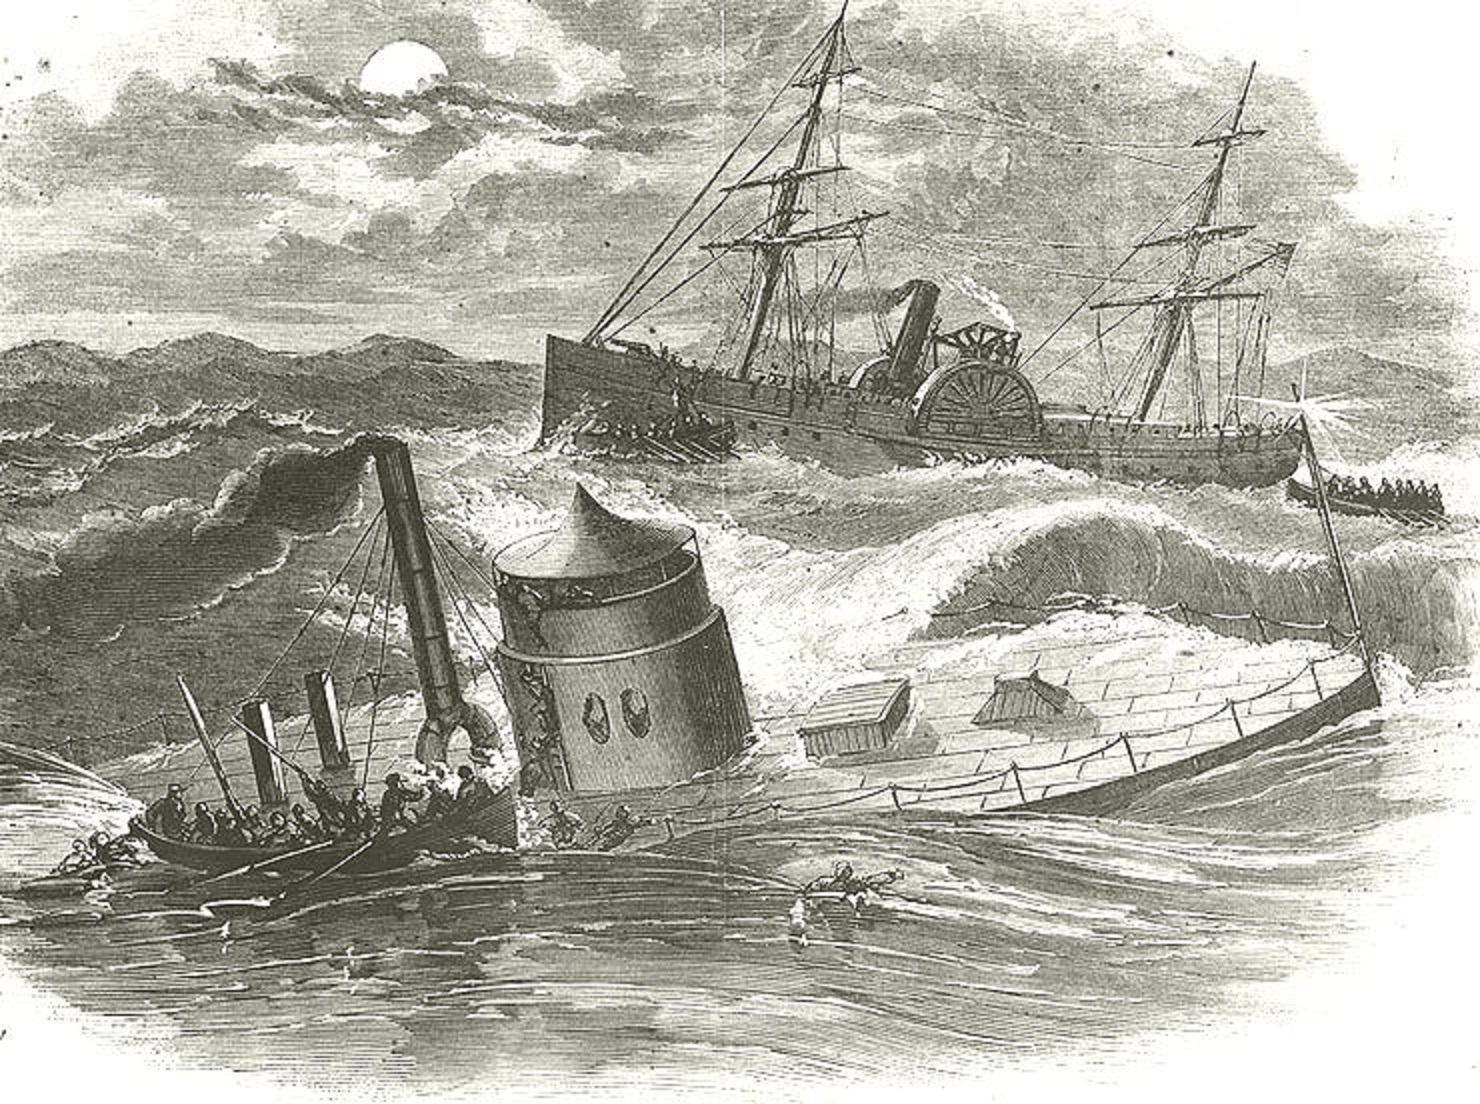 Engraving of USS Monitor sinking, with USS Rhode Island in the background ~